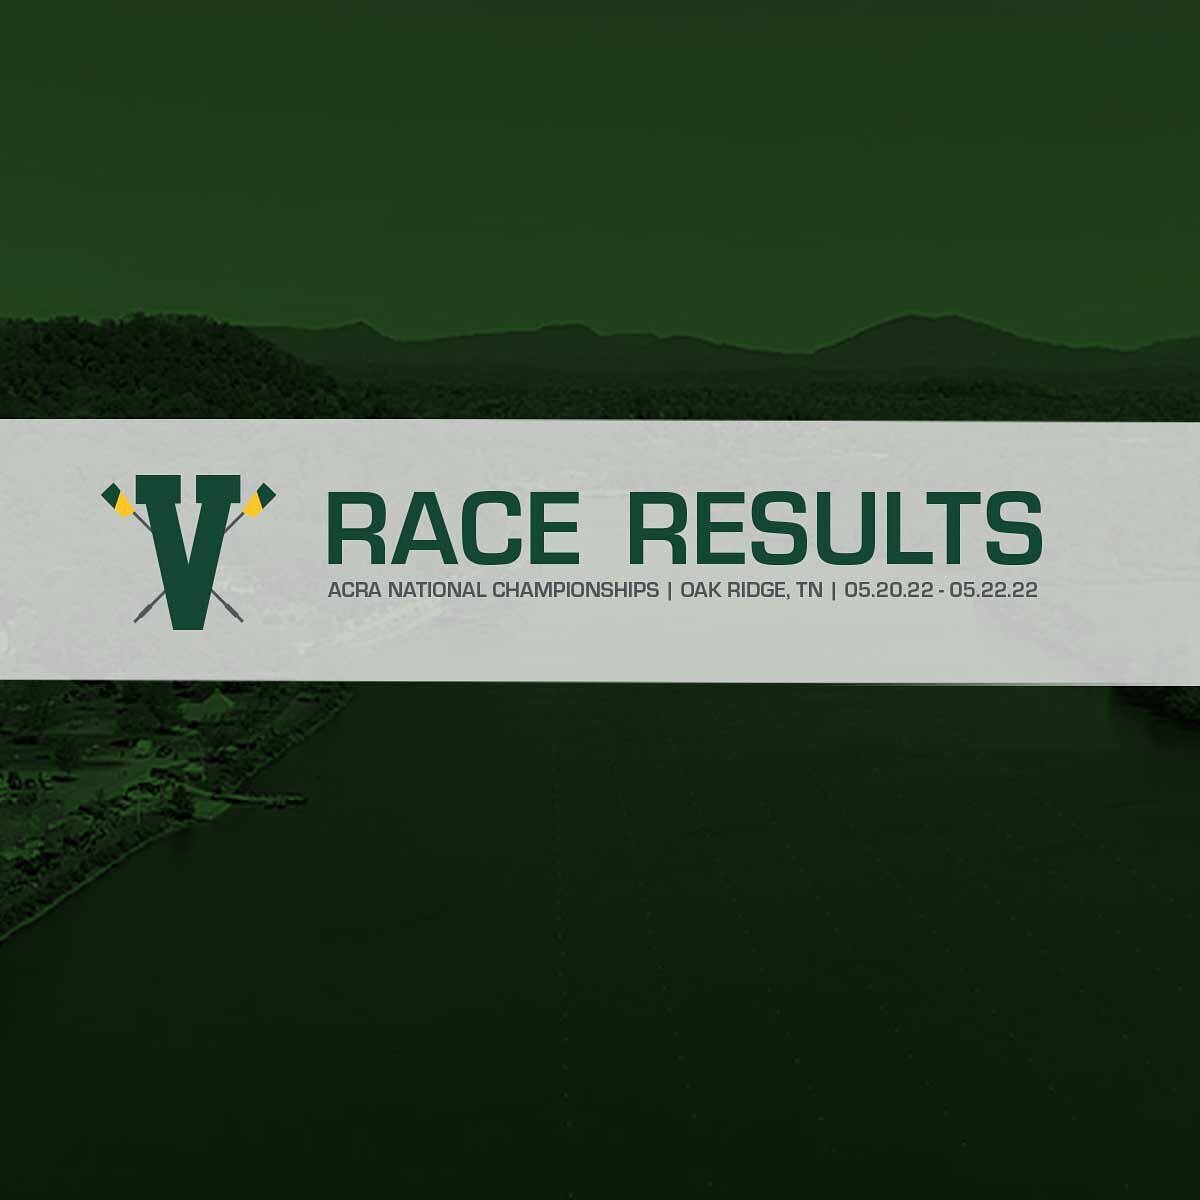 The team had a strong showing at @acra_rowing National Championships in Oak Ridge, TN. Boats are heading back to VT with medals and top finishes in Grand Finals, Petite Finals and C Finals. Hard races turned into cheers for teammates and happy tears 